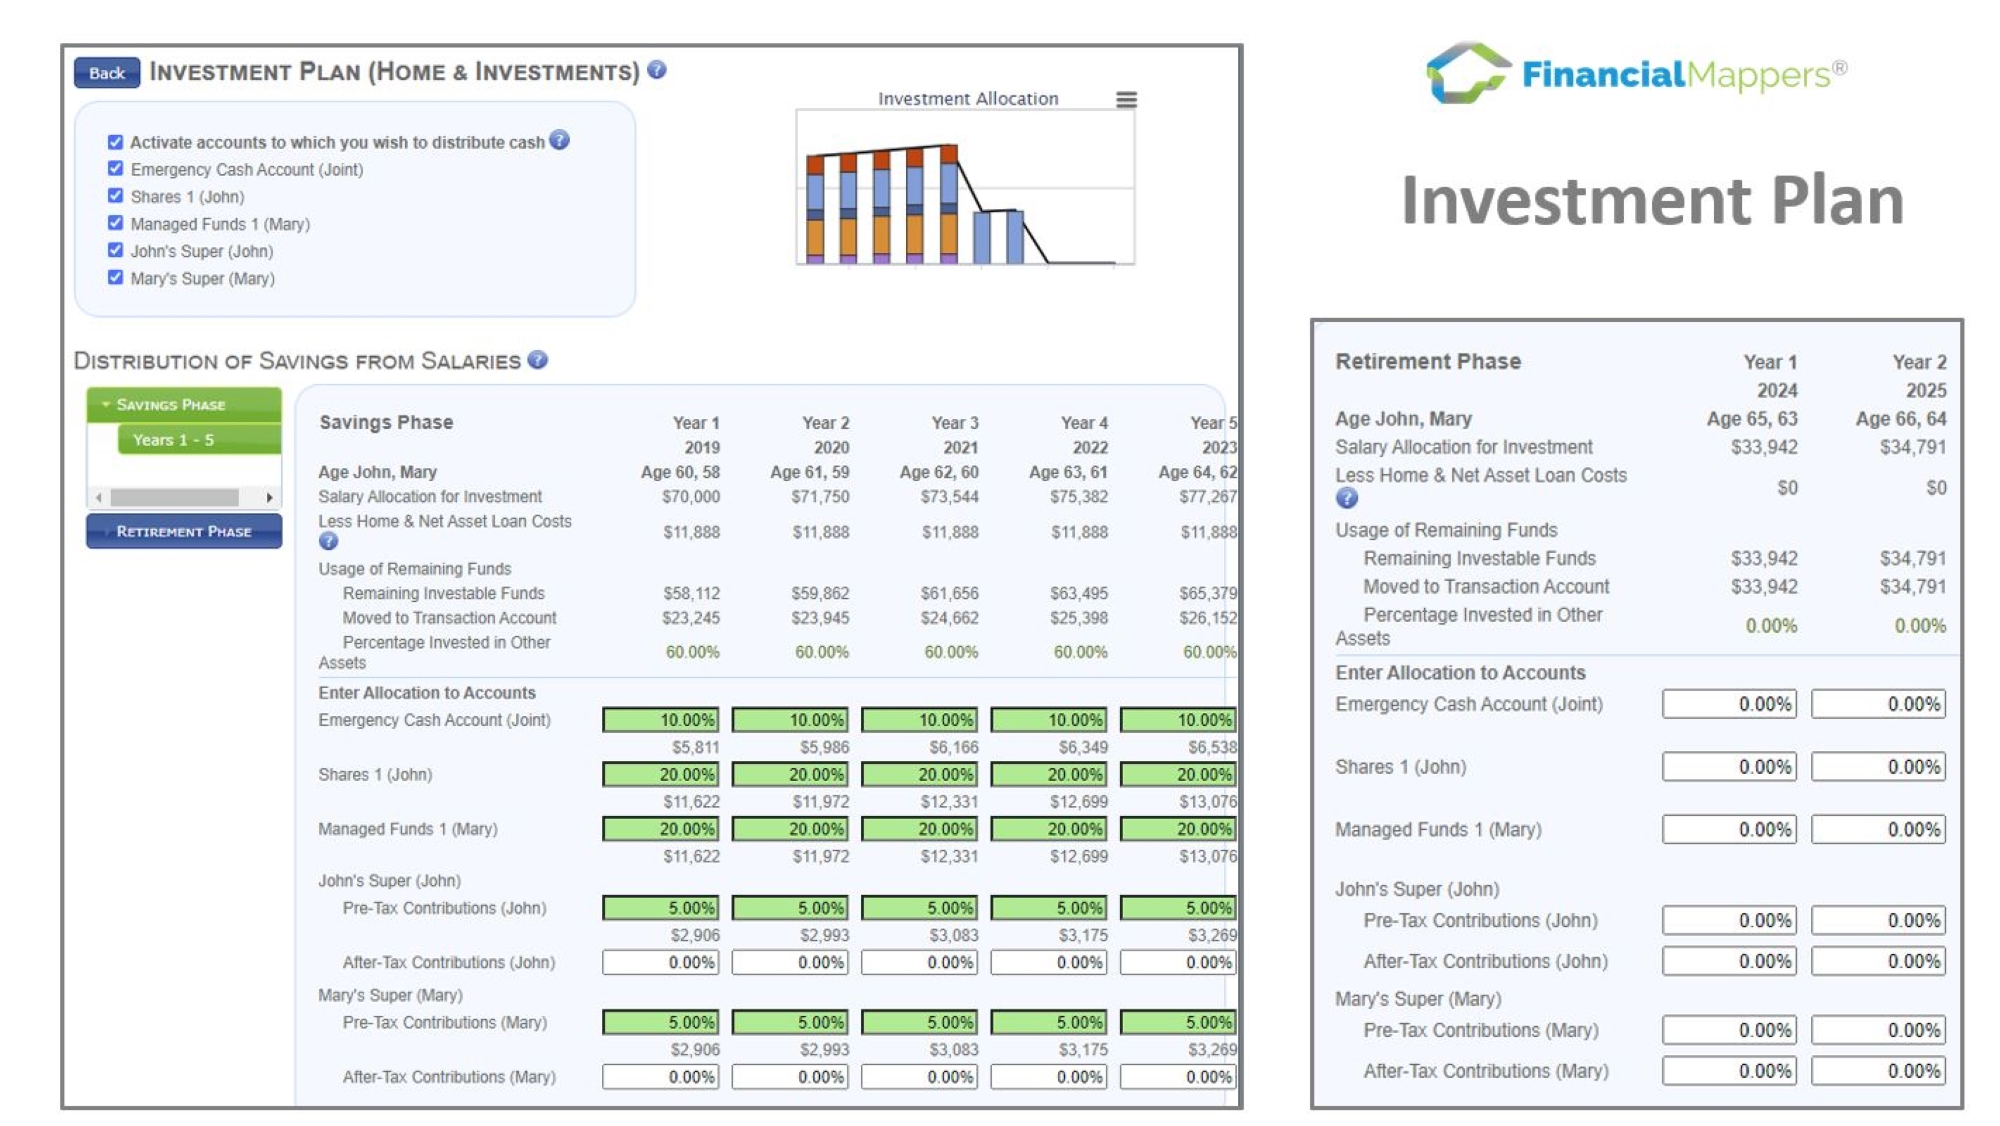 Screenshot creating an Investment Plan using Financial Mappers software for management of Home ownership, Investments and Superannuation.